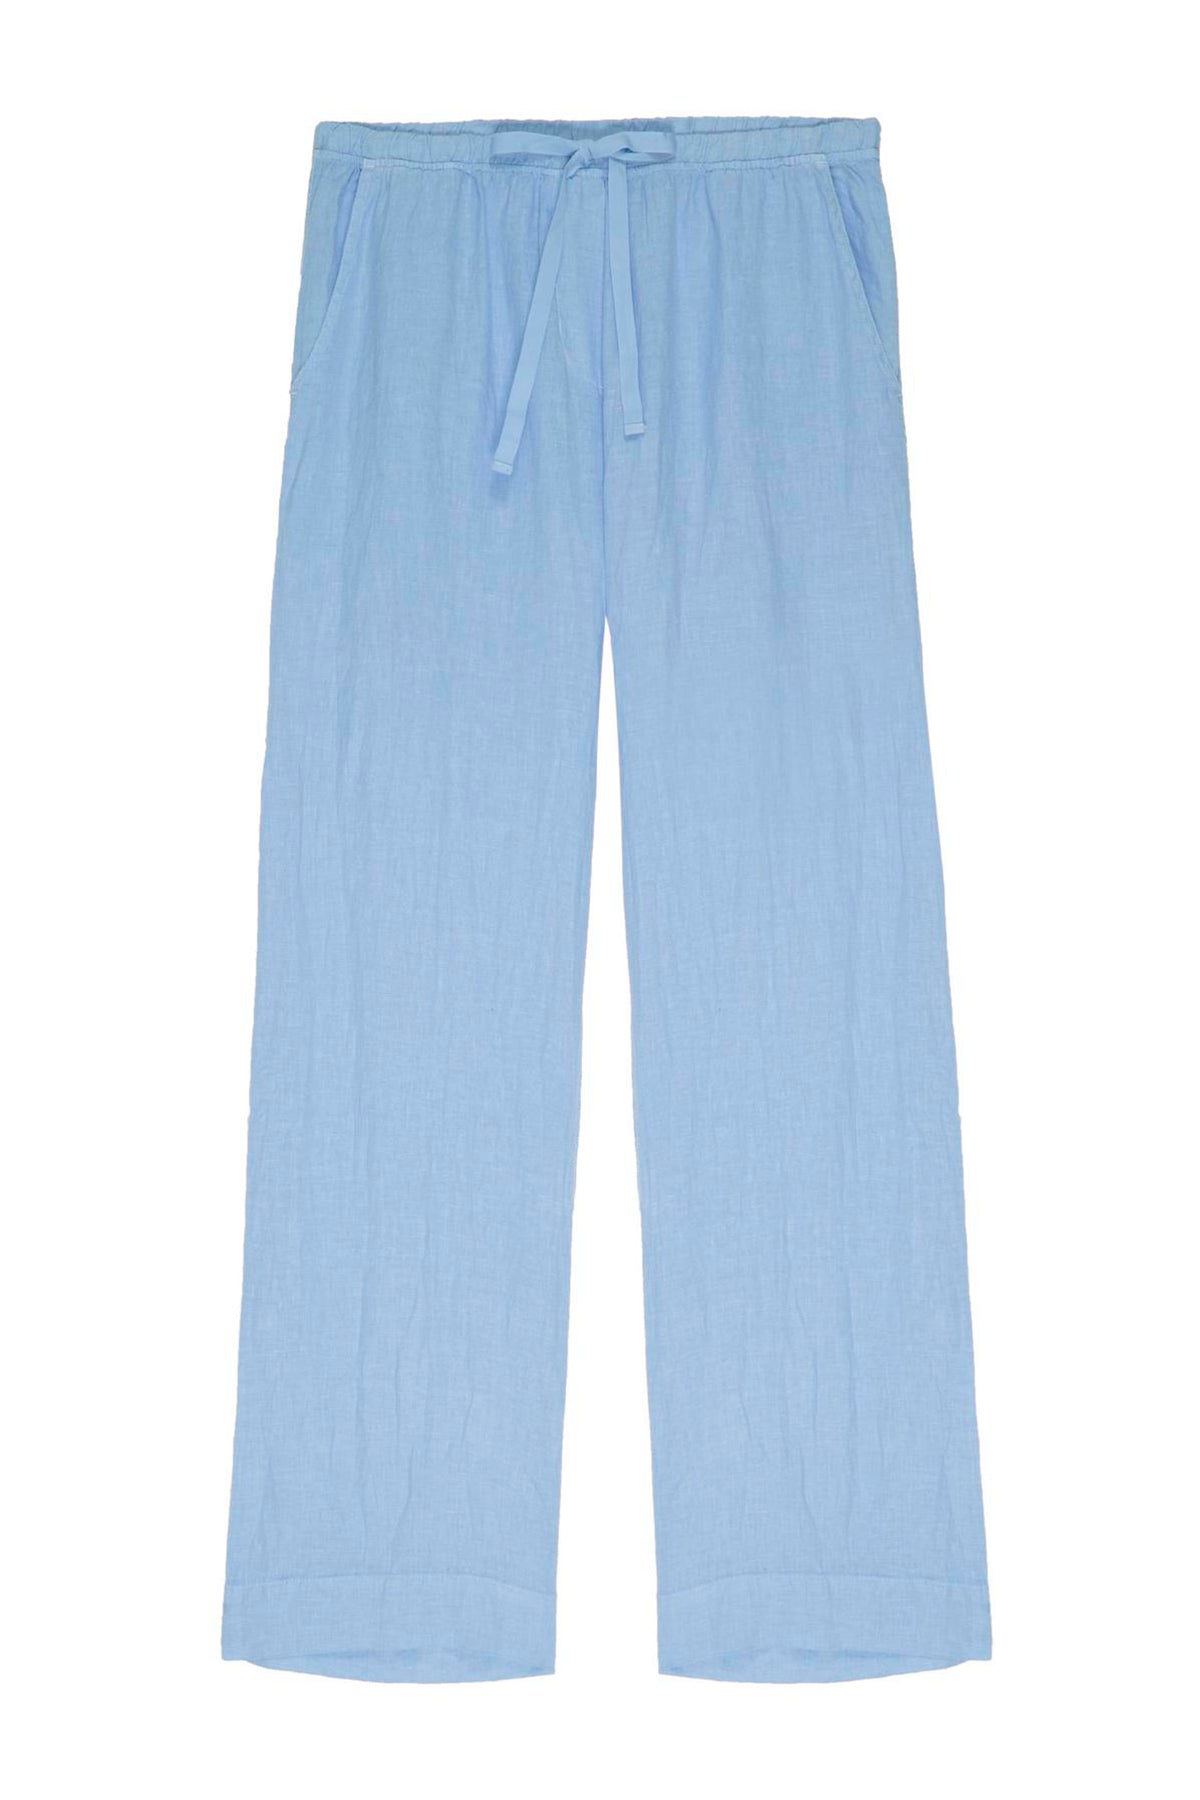 Light blue linen PICO PANT with a relaxed fit, isolated on a white background by Velvet by Jenny Graham.-36580165517505